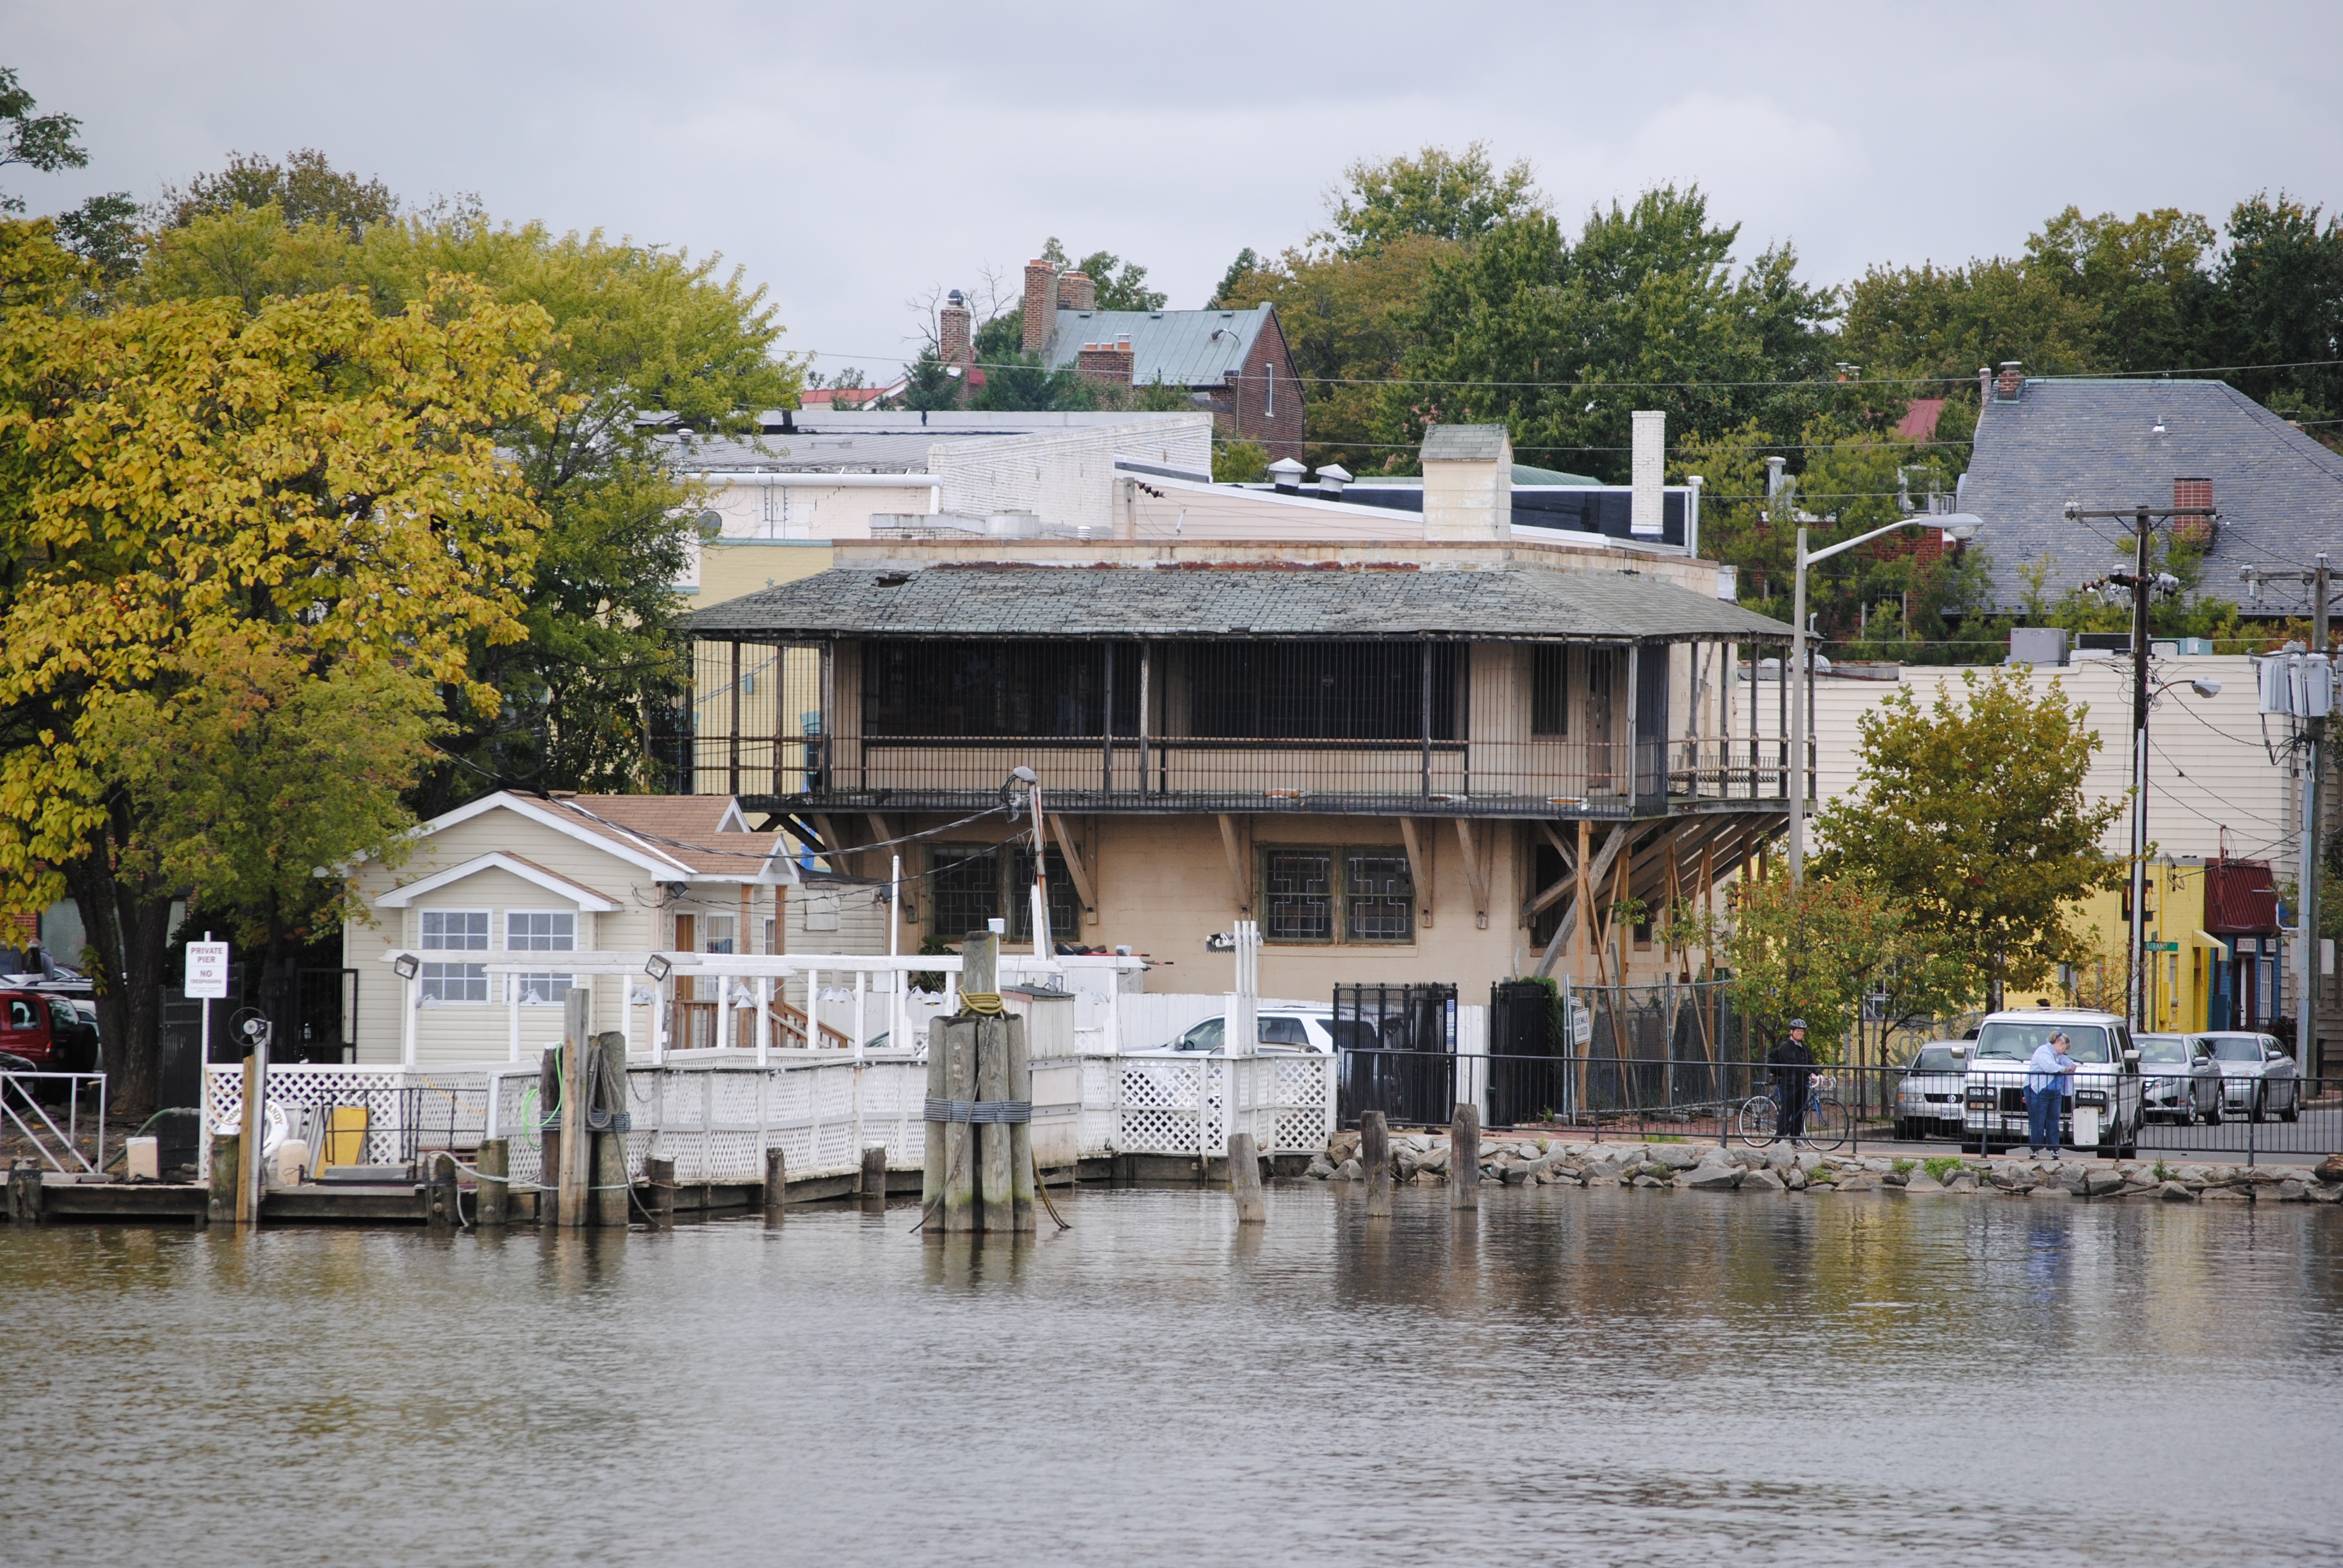 Boat club deal sacrifices private property rights for whom?